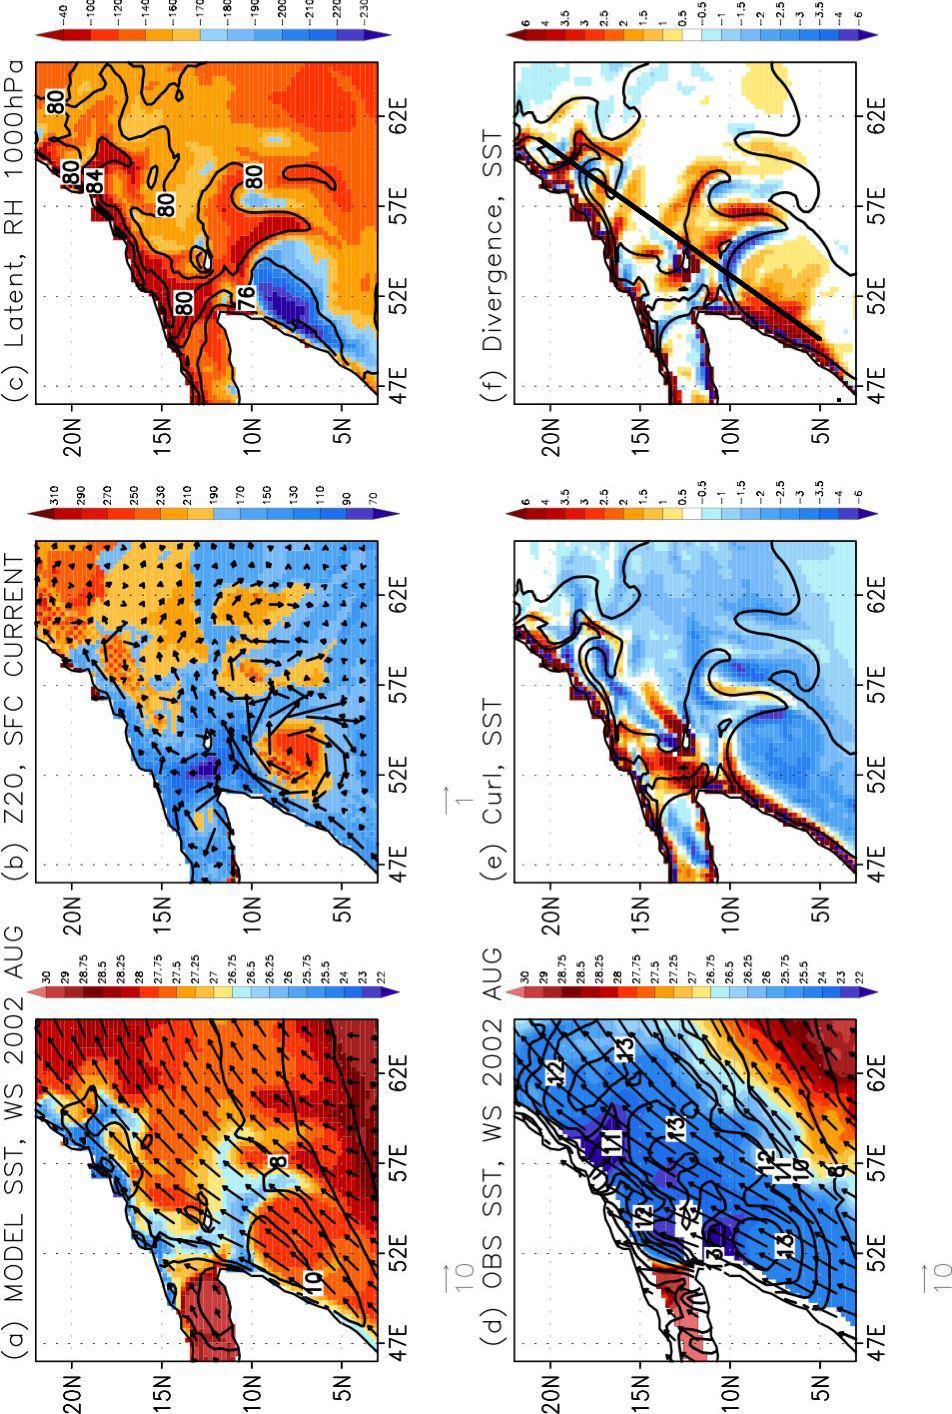 Simulated mean properties of the western Arabian sea (a) Model SST, WS, 2002 AUG (b) Z20, SFC CURRENT (d) OBS SST, WS, 2002 AUG (e) Wind Stress Curl, SST (c) Latent Heat Flux, RH at 1000 hpa (f) Wind